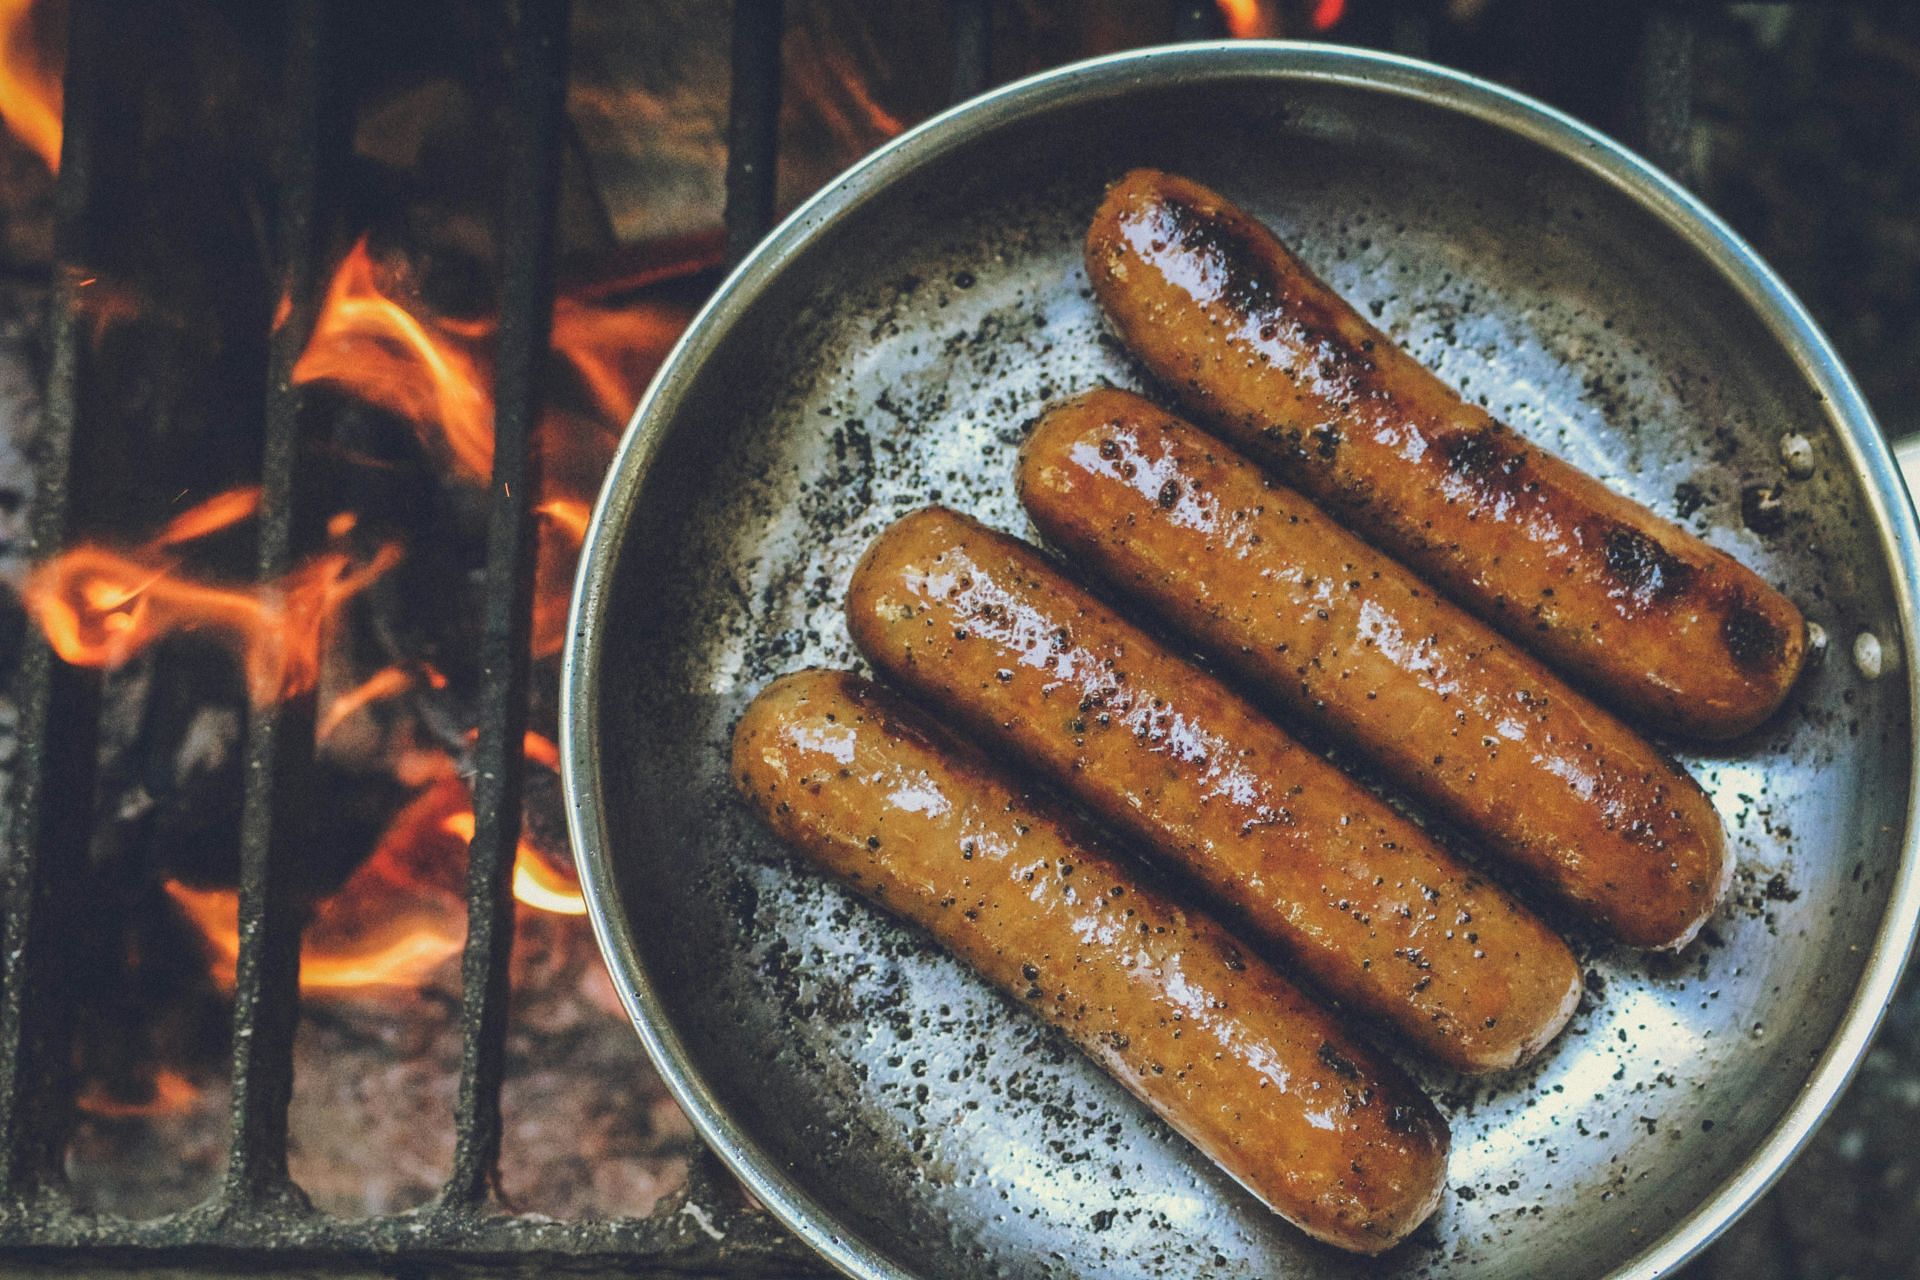 Sausages are linked to heart diseases (Image by Rachel Clark/Unsplash)